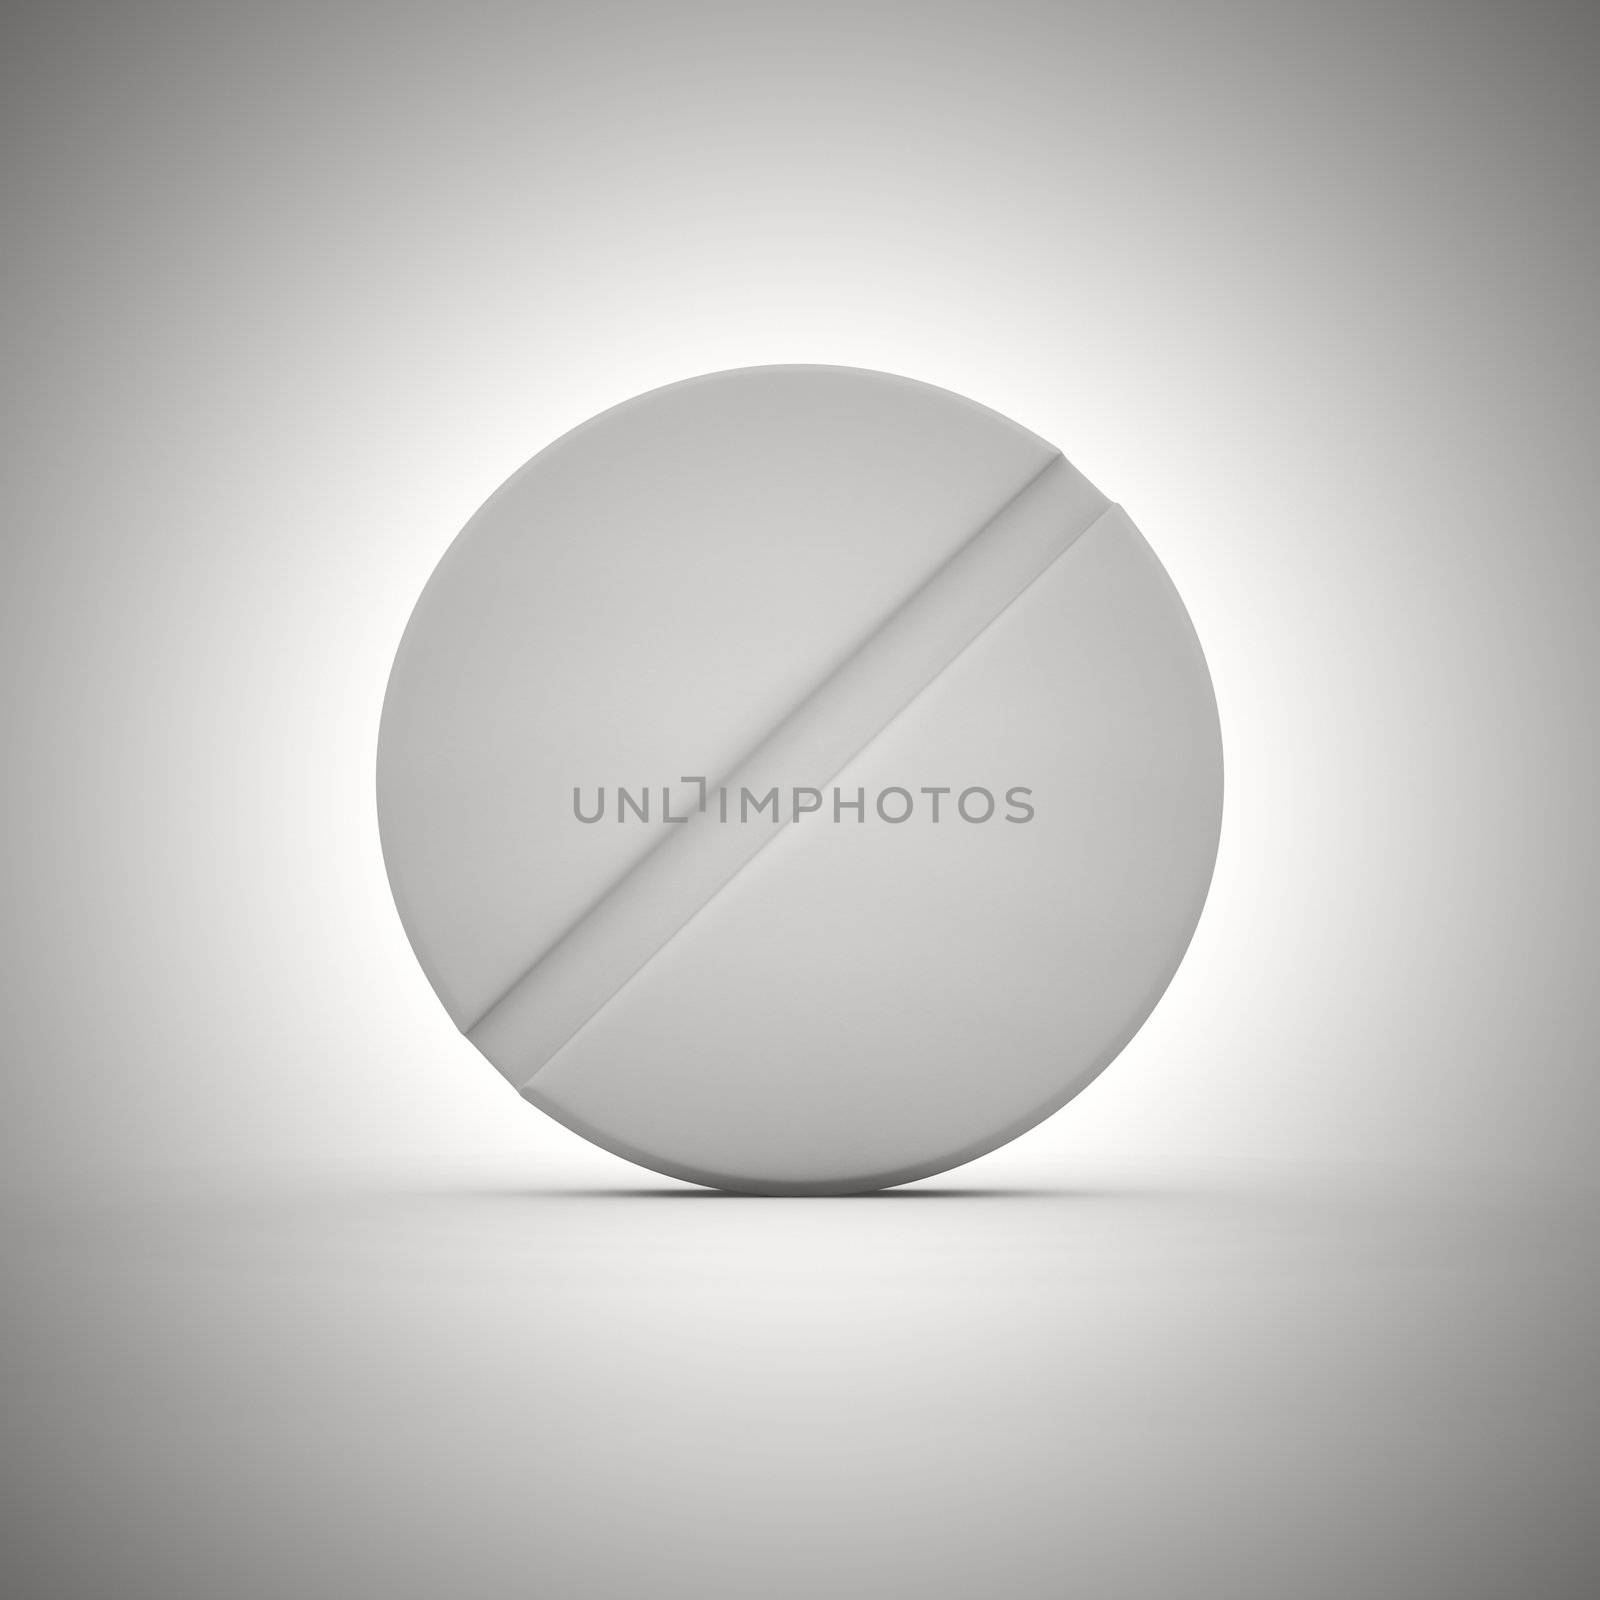 Big white tablet of round shape